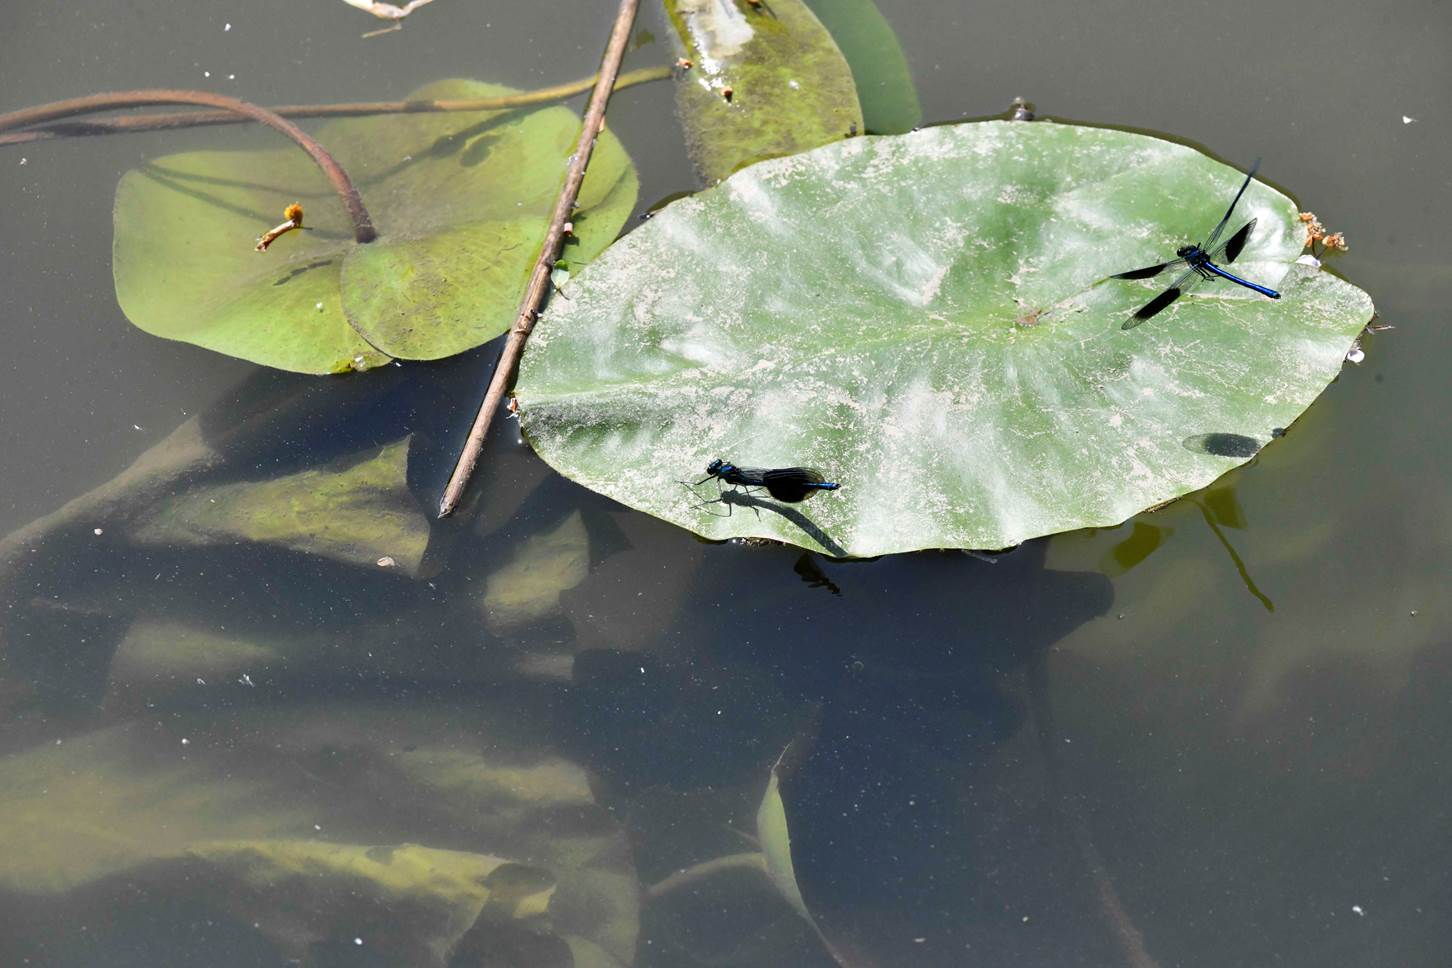 A close-up of a lily pad

Description automatically generated